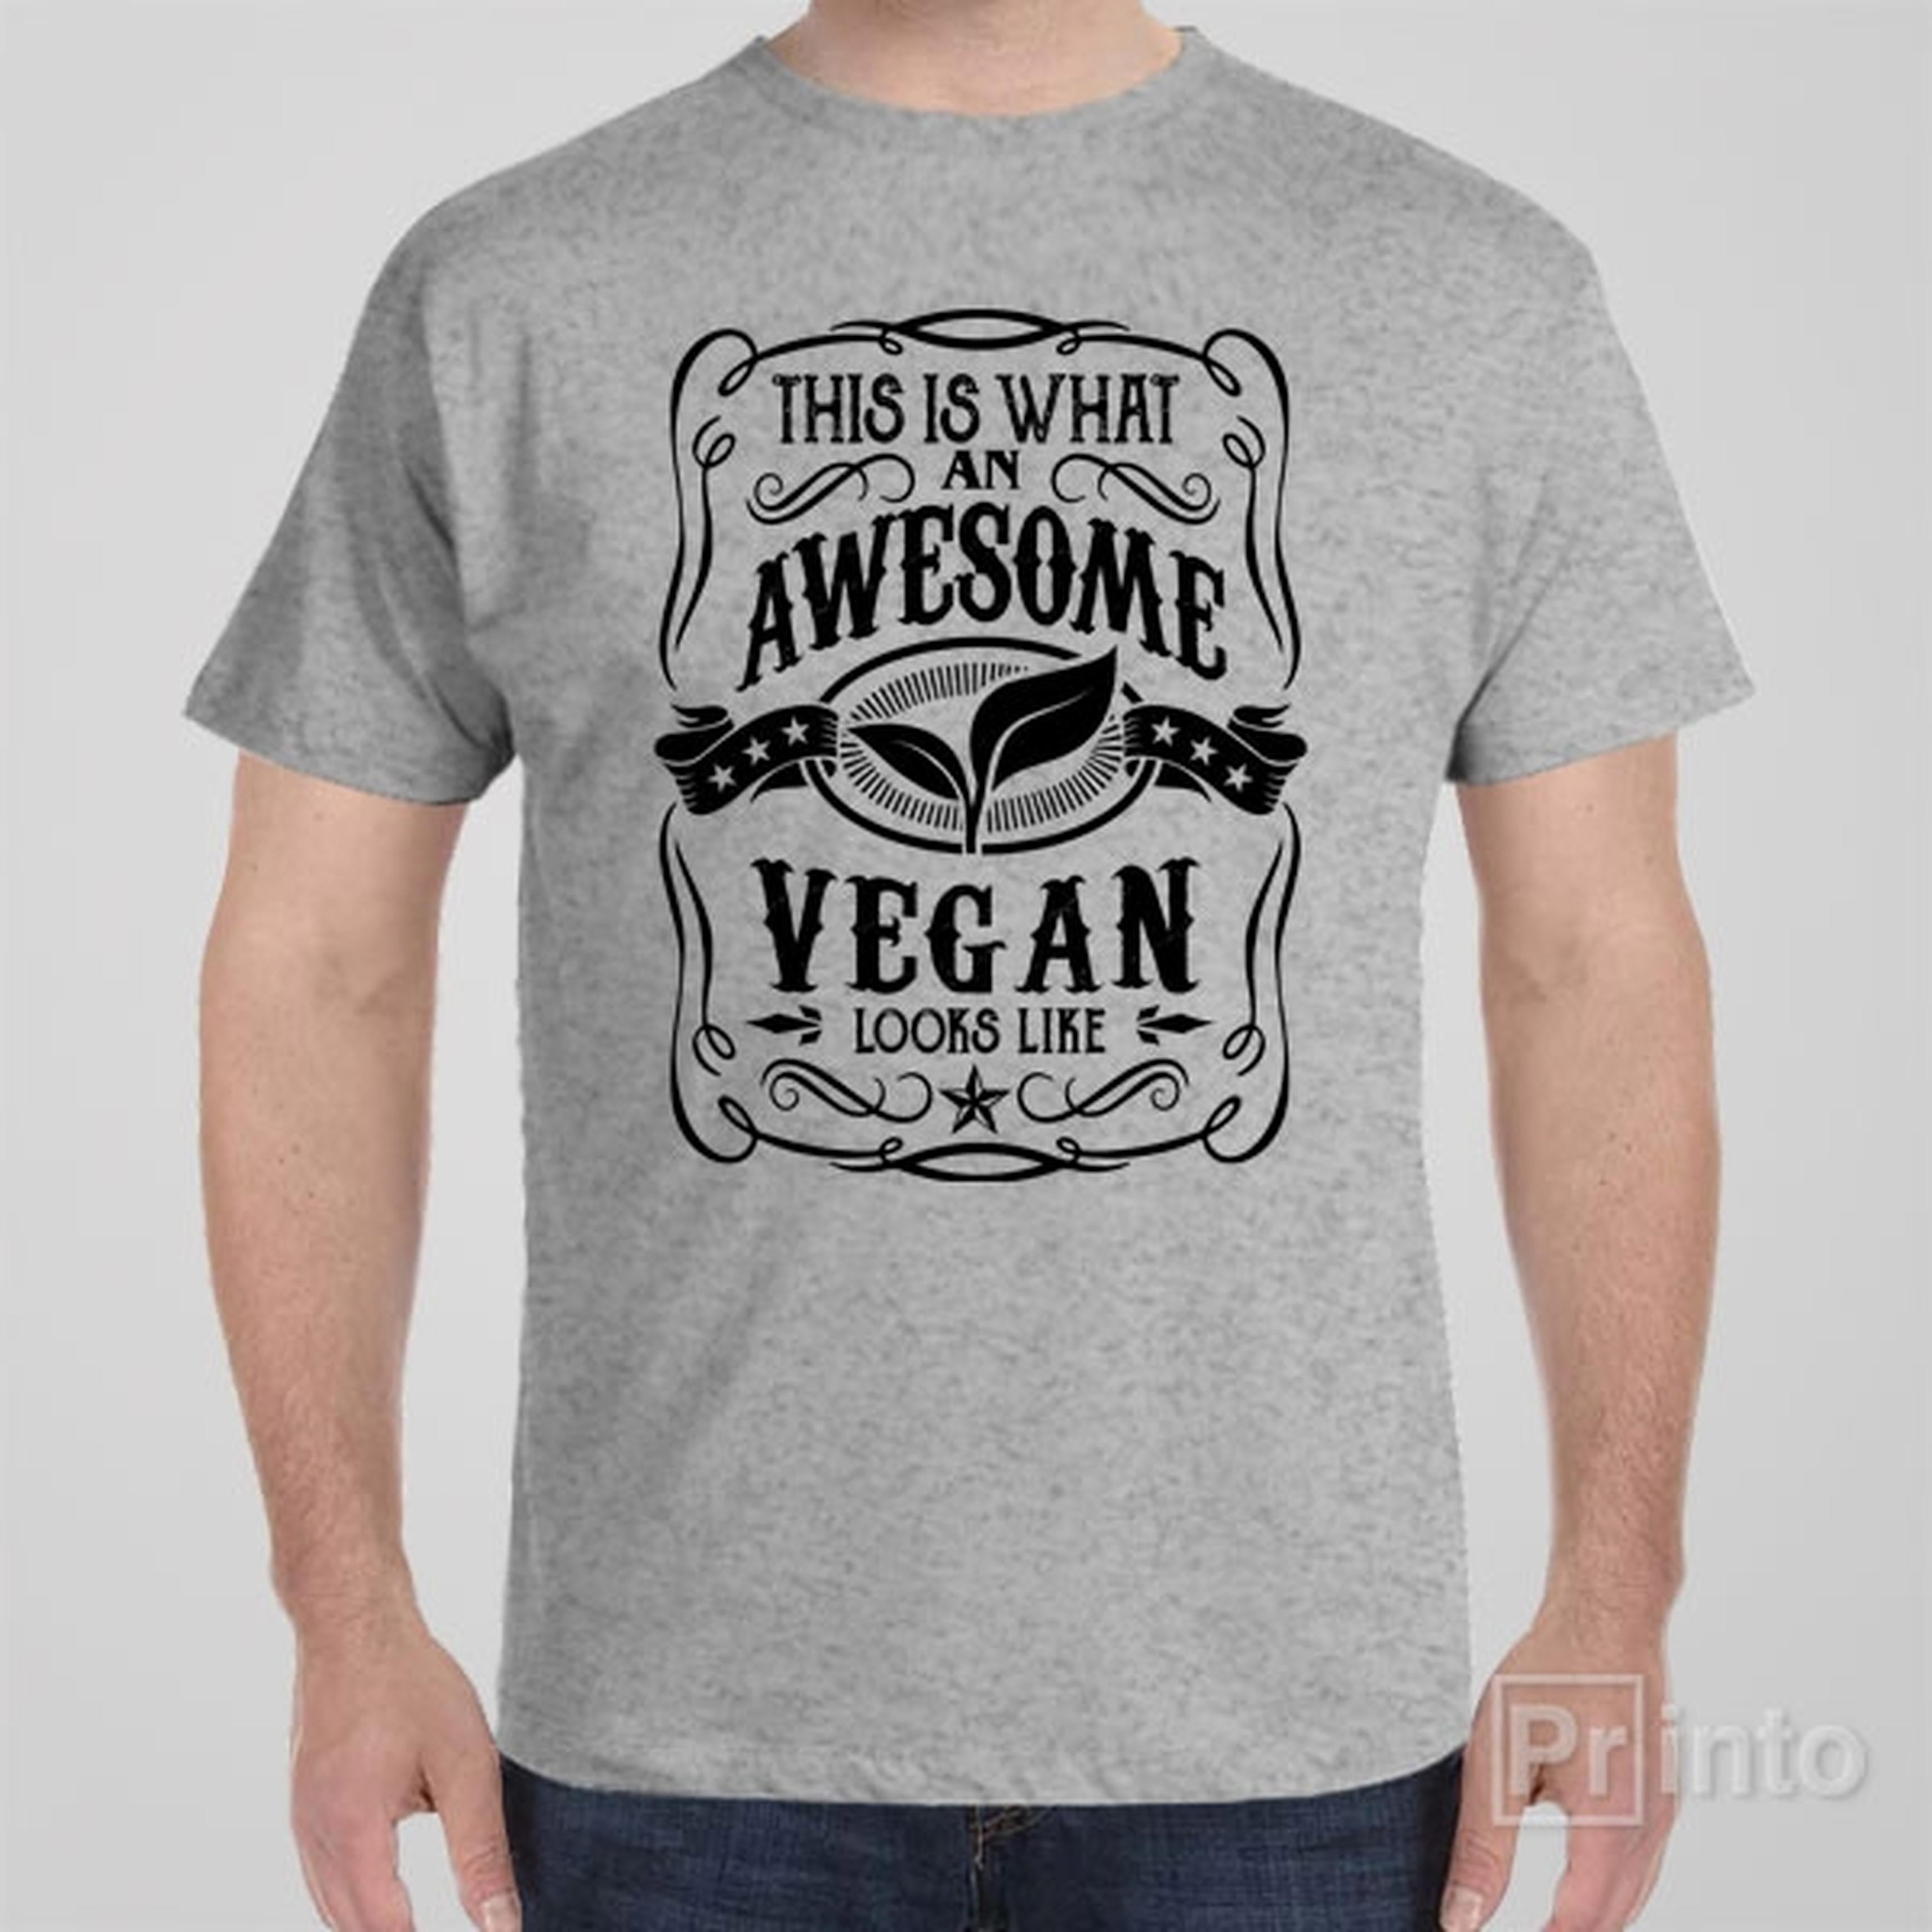 this-is-what-an-awesome-vegan-looks-like-t-shirt